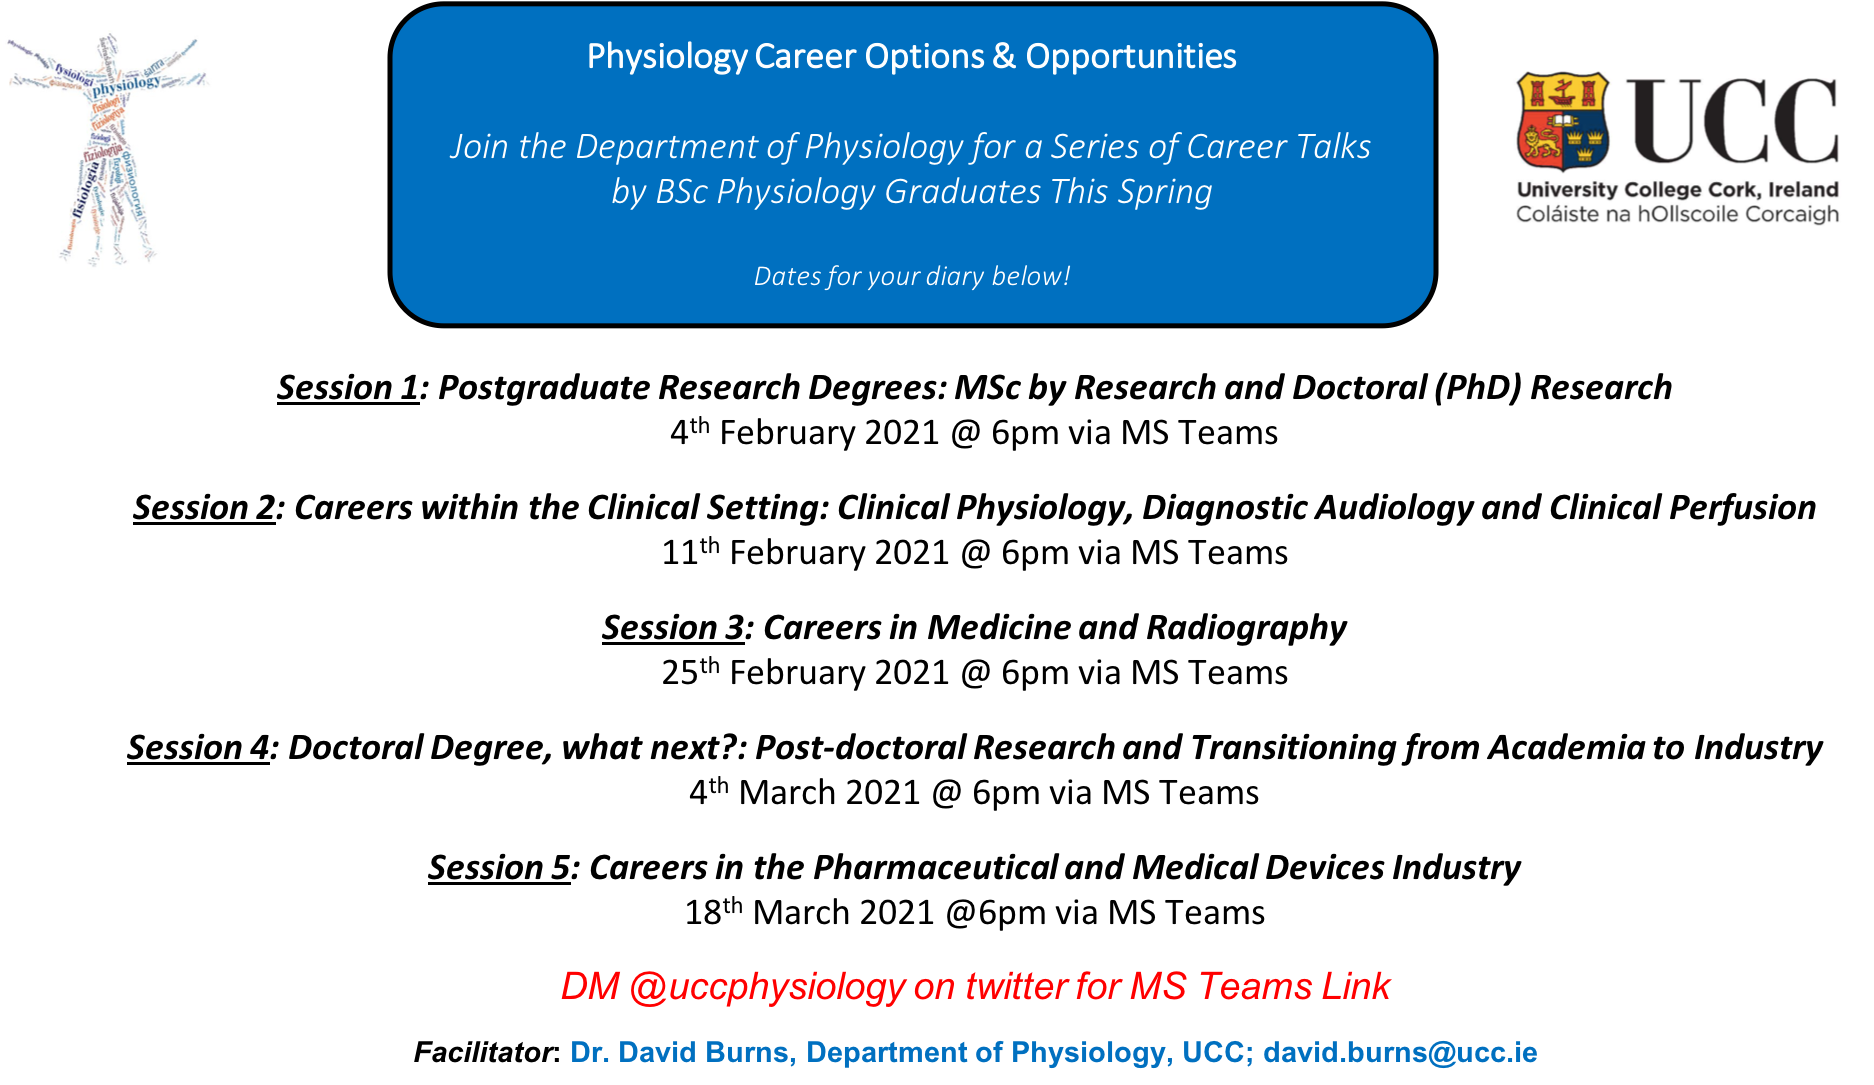 Physiology Career Options and Opportunities: Series of Career Talks!